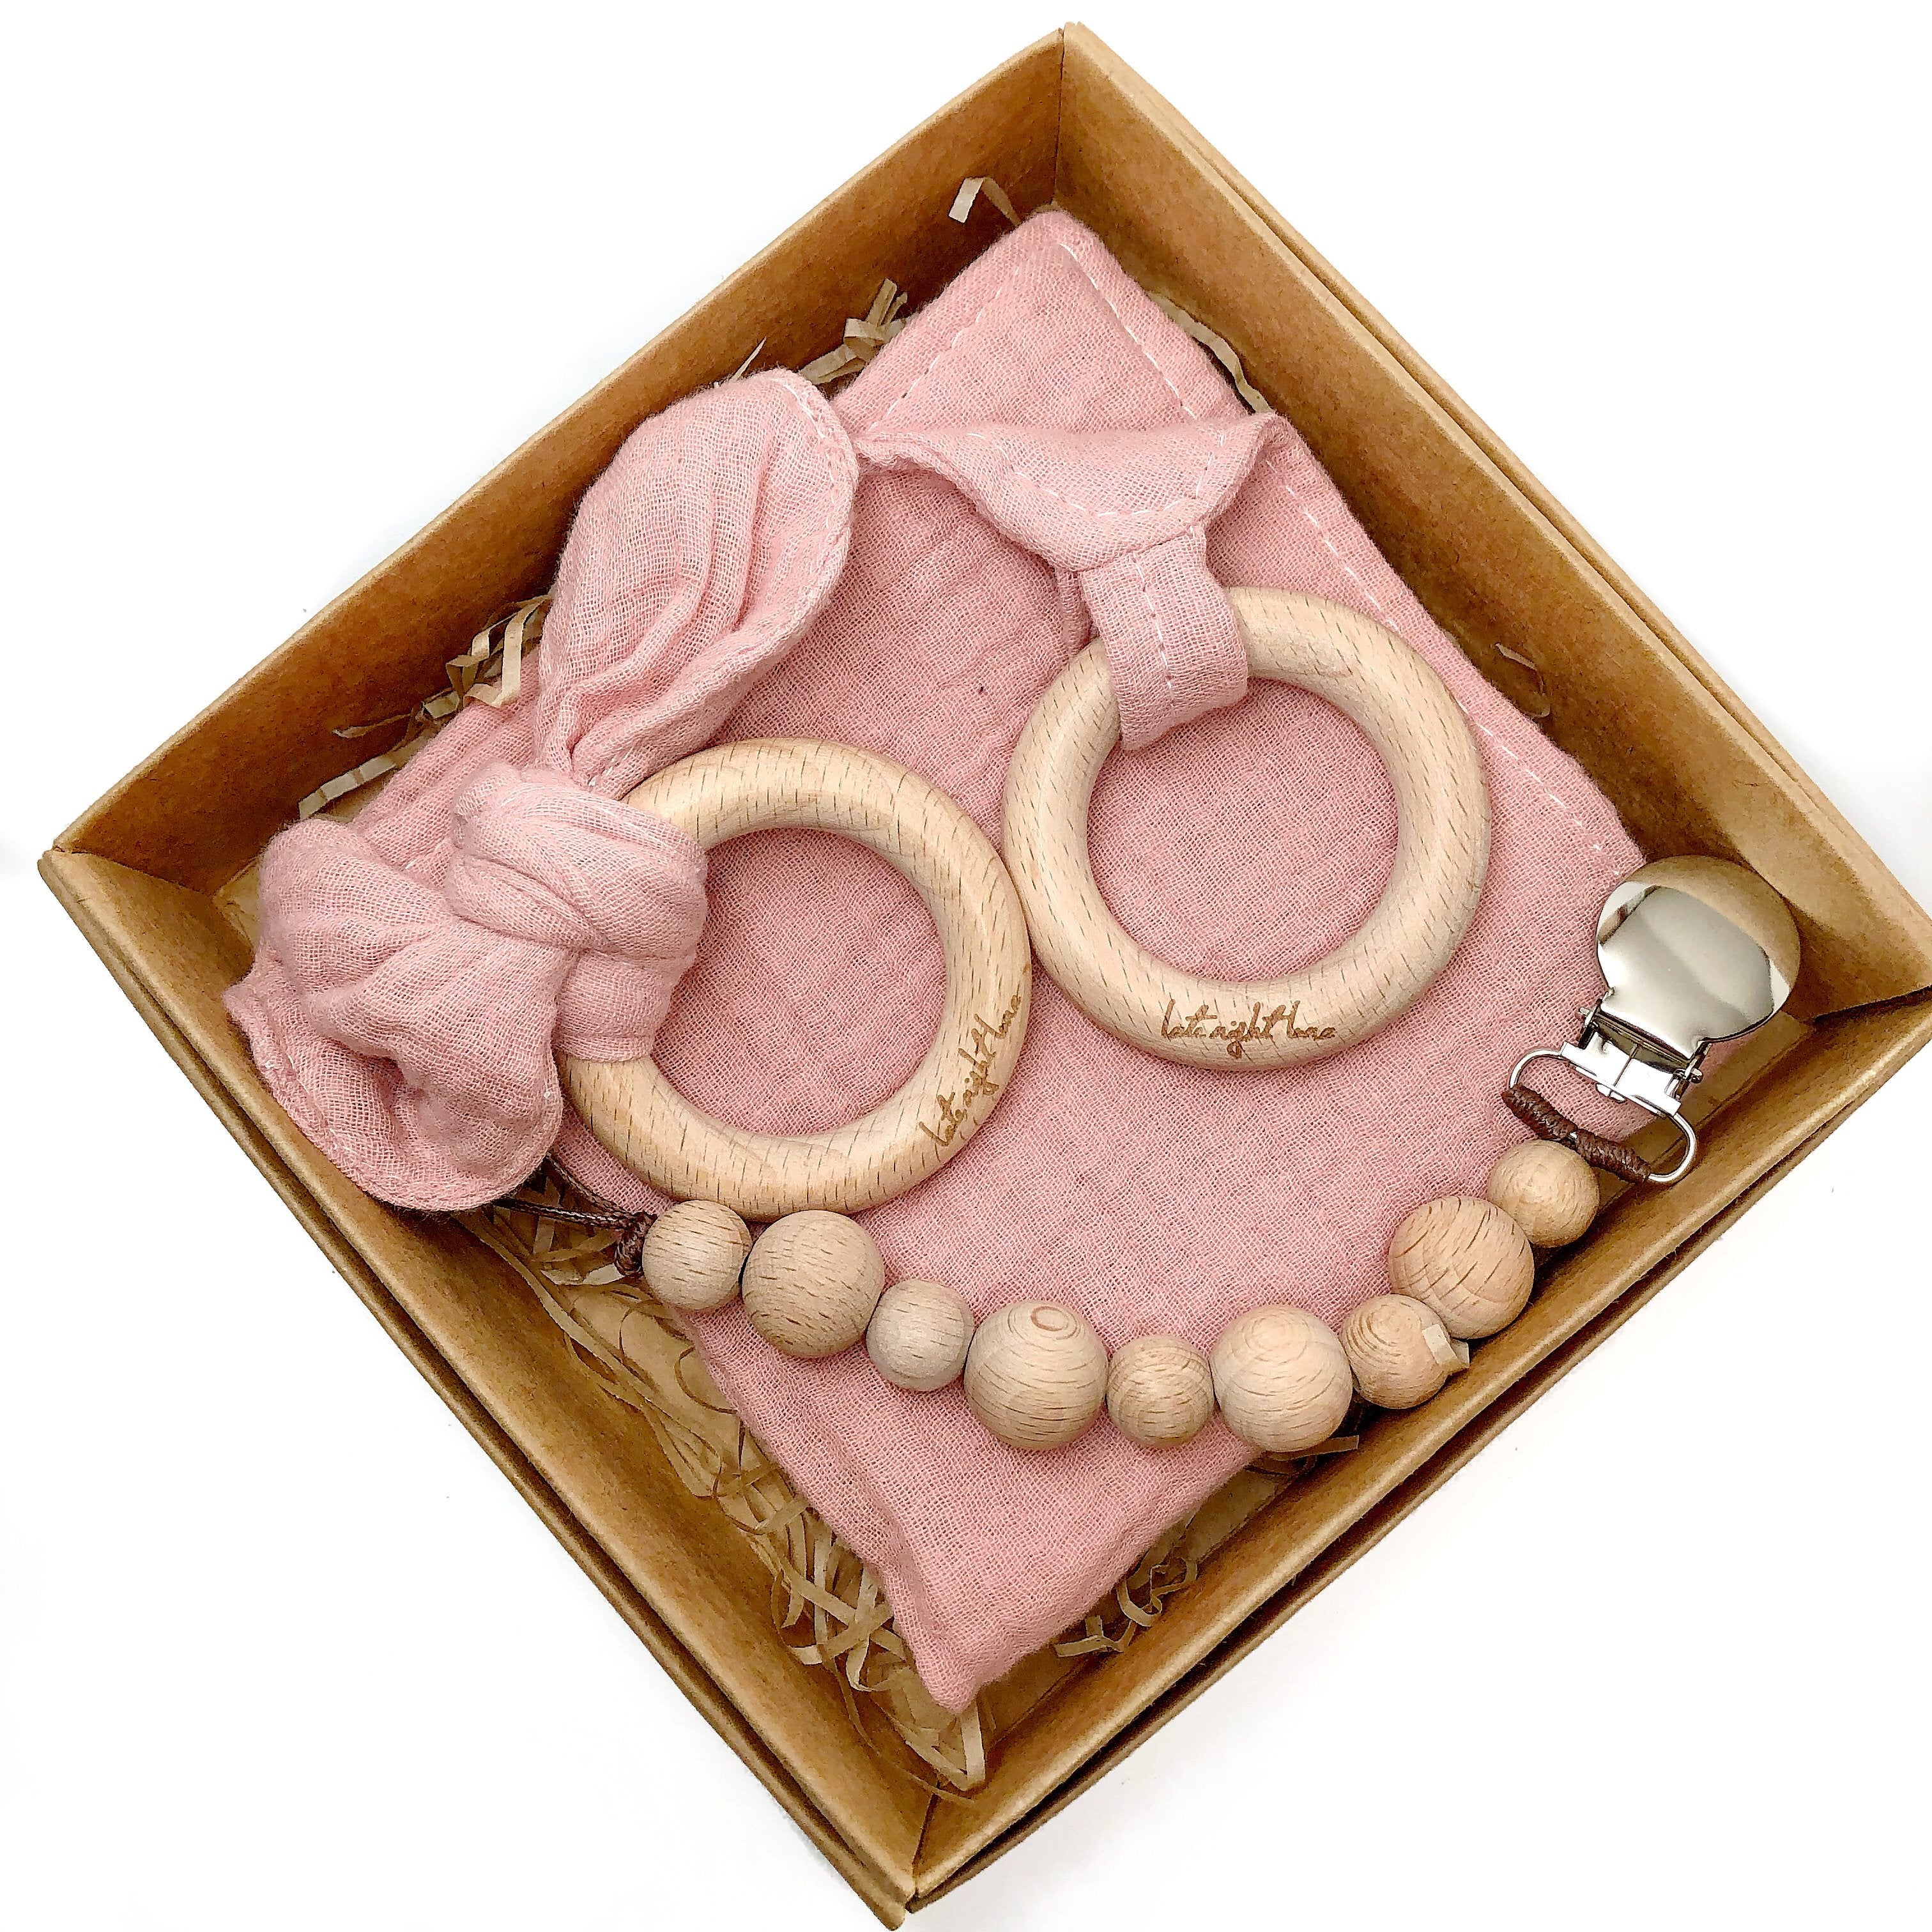 Baby Lovey Gift Set with Teething Toy & Pacifier Clip - 100% Cotton